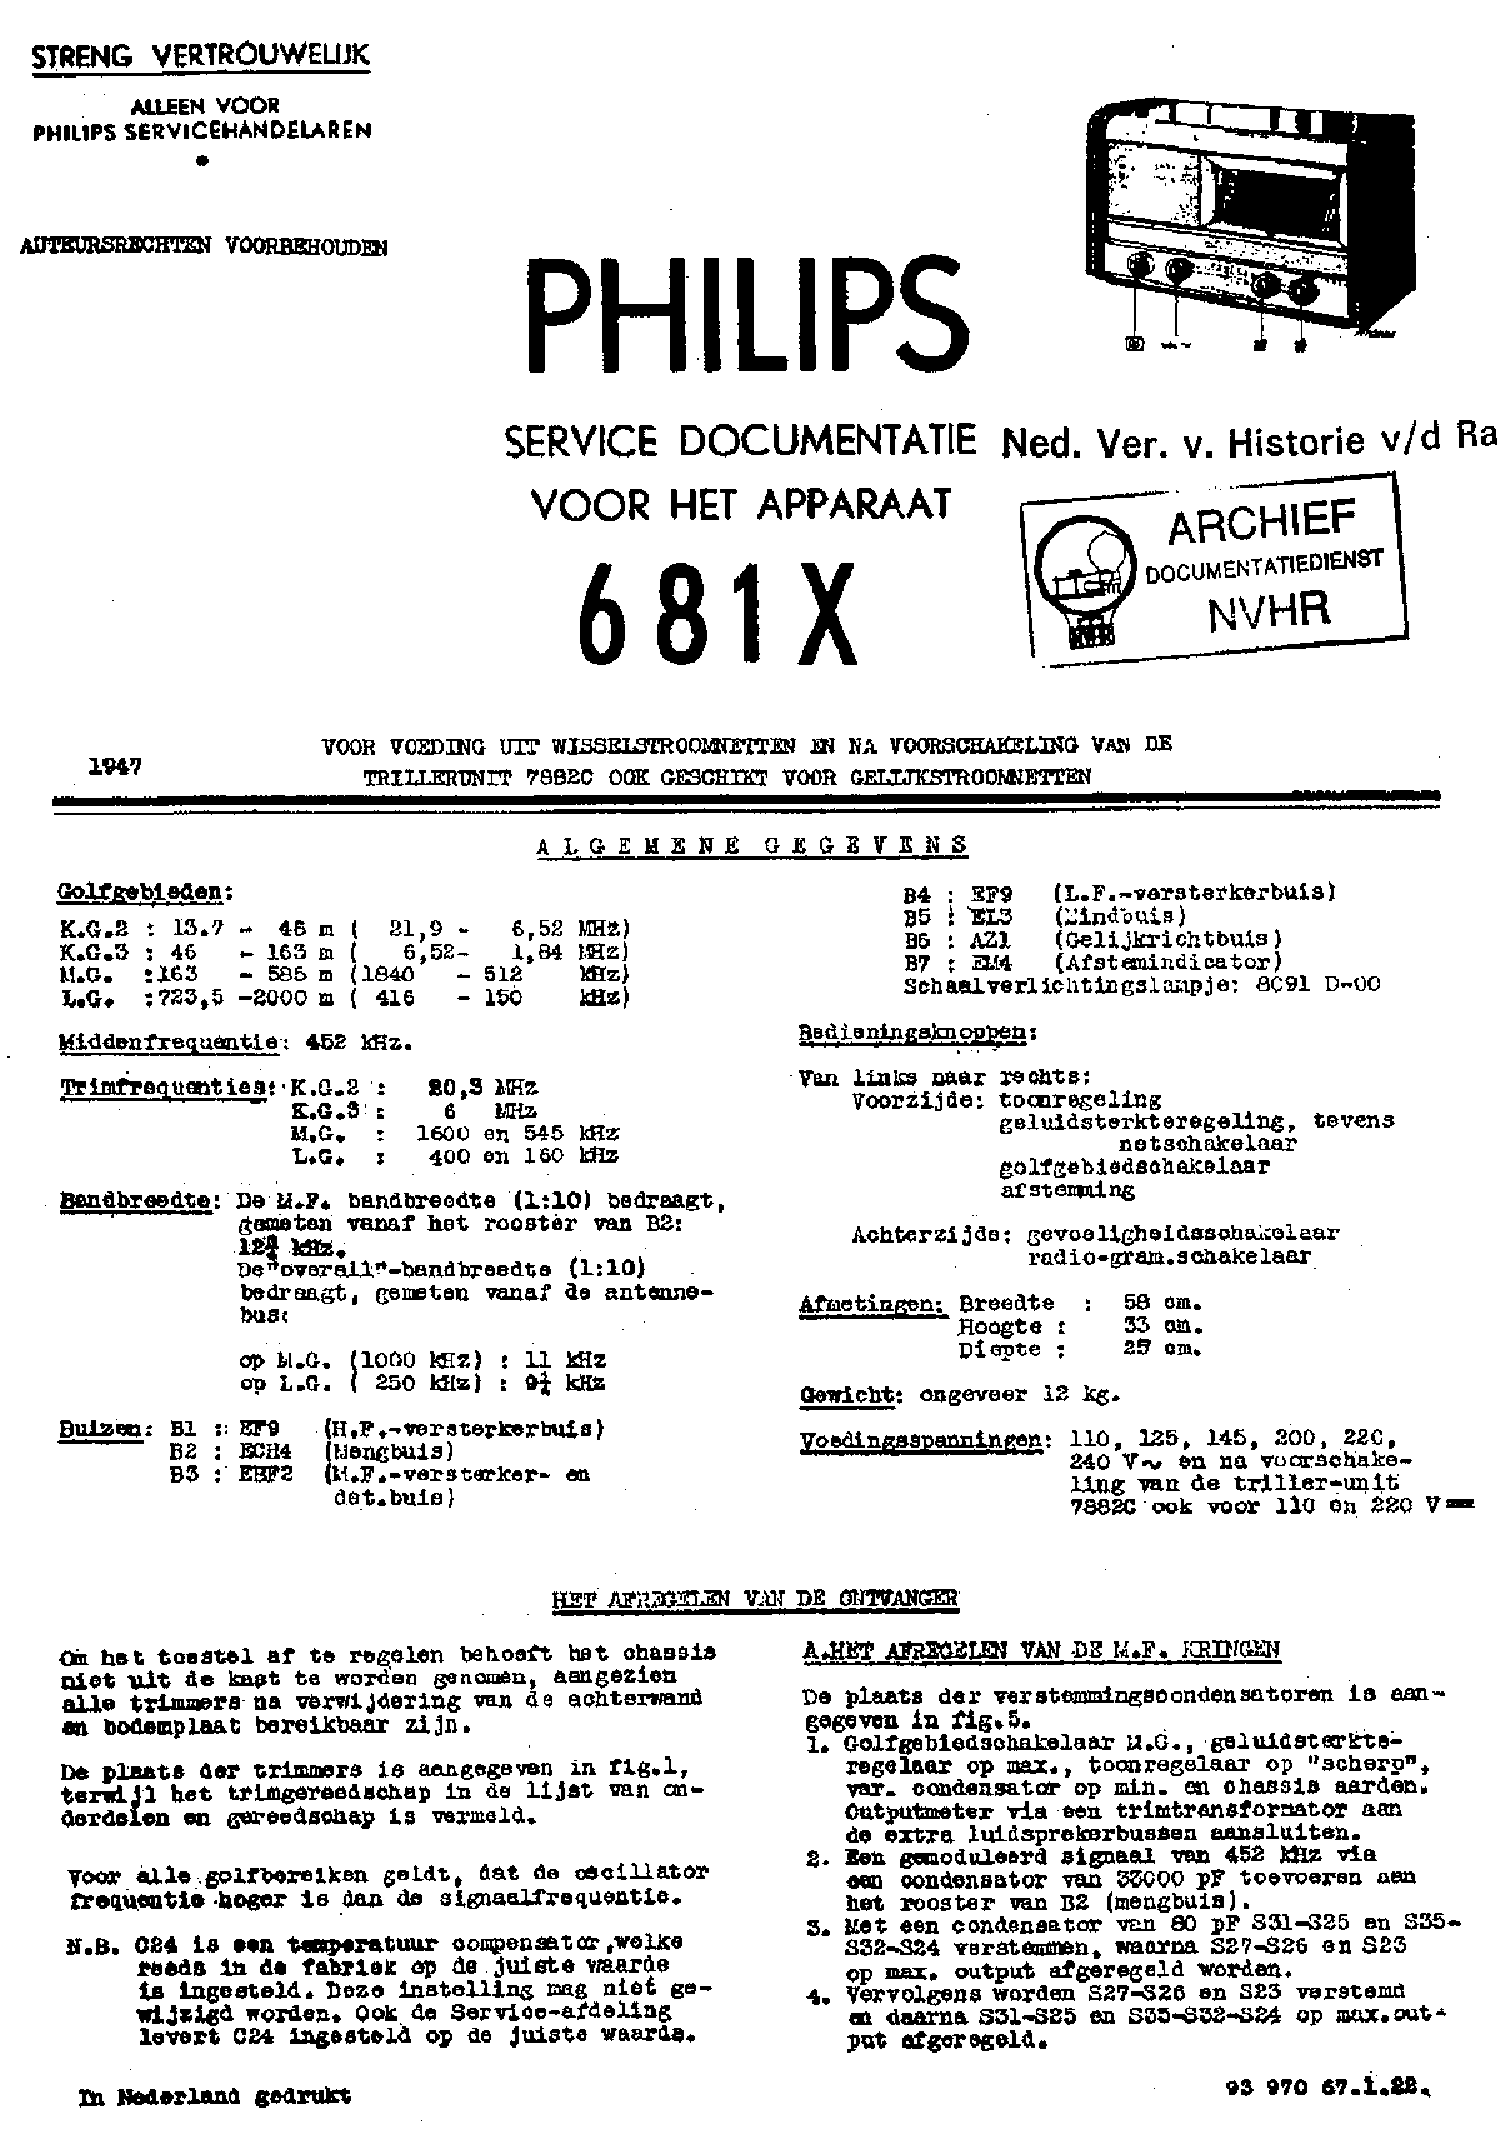 PHILIPS 681X AC RECEIVER 1947 SM service manual (1st page)